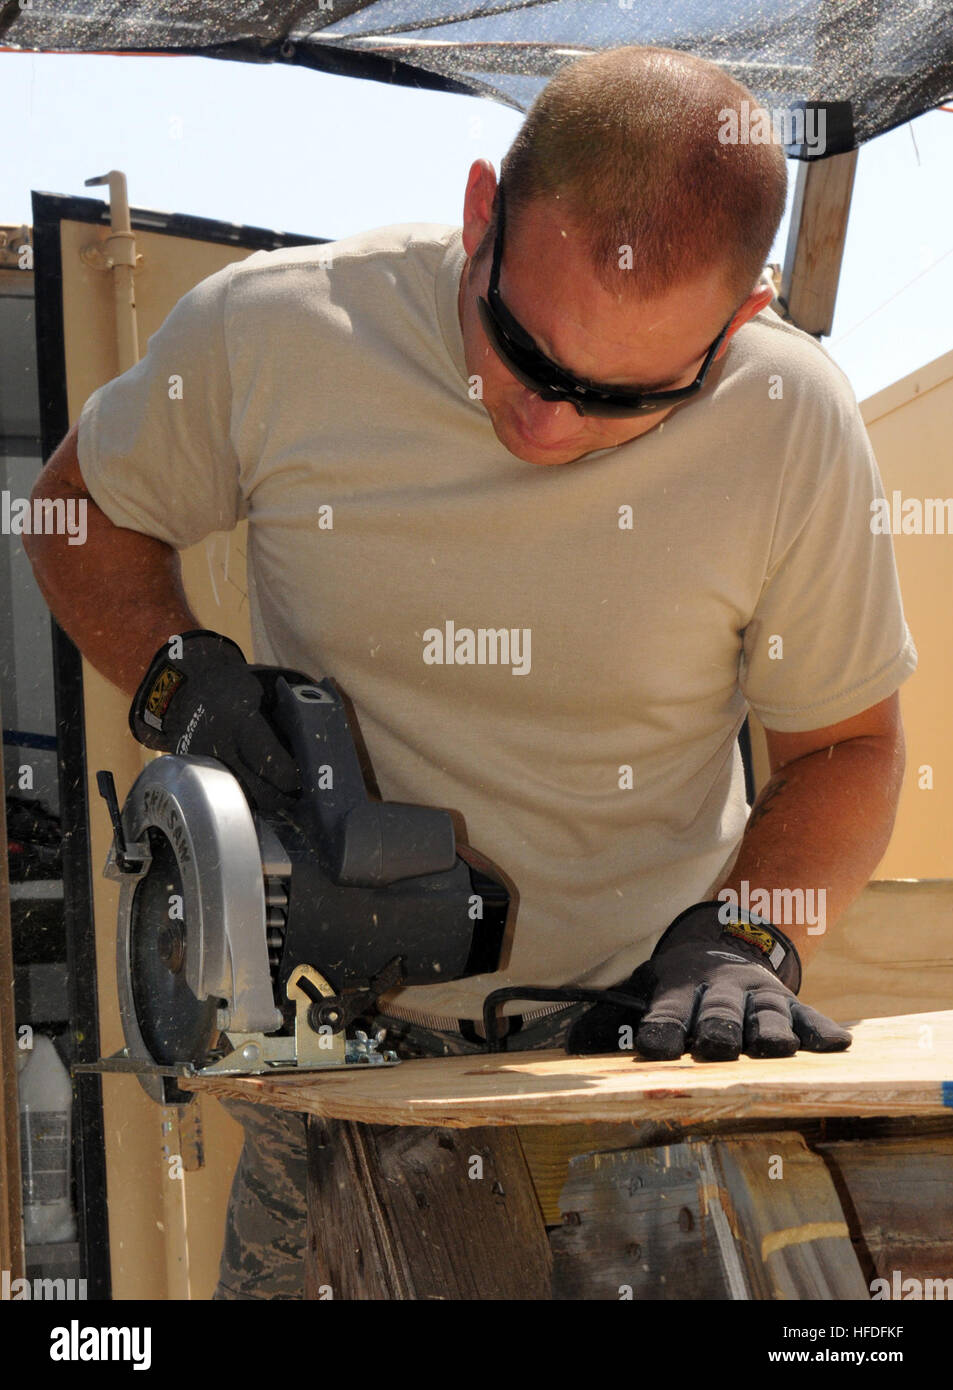 GUANTANAMO BAY, Cuba – Air Force Staff Sgt. Gary Learmonth, of the 474th Expeditionary Civil Engineering Squadron, Base Emergency Engineer Force, Joint Task Force Guantanamo, uses a saw to cut plywood in Camp Justice, March 16, 2010. The 474th ECES maintains the Expeditionary Legal Complex, vital to the JTF mission. JTF Guantanamo conducts safe, humane, legal and transparent care and custody of detainees, including those convicted by military commission and those ordered released by a court. The JTF conducts intelligence collection, analysis and dissemination for the protection of detainees an Stock Photo